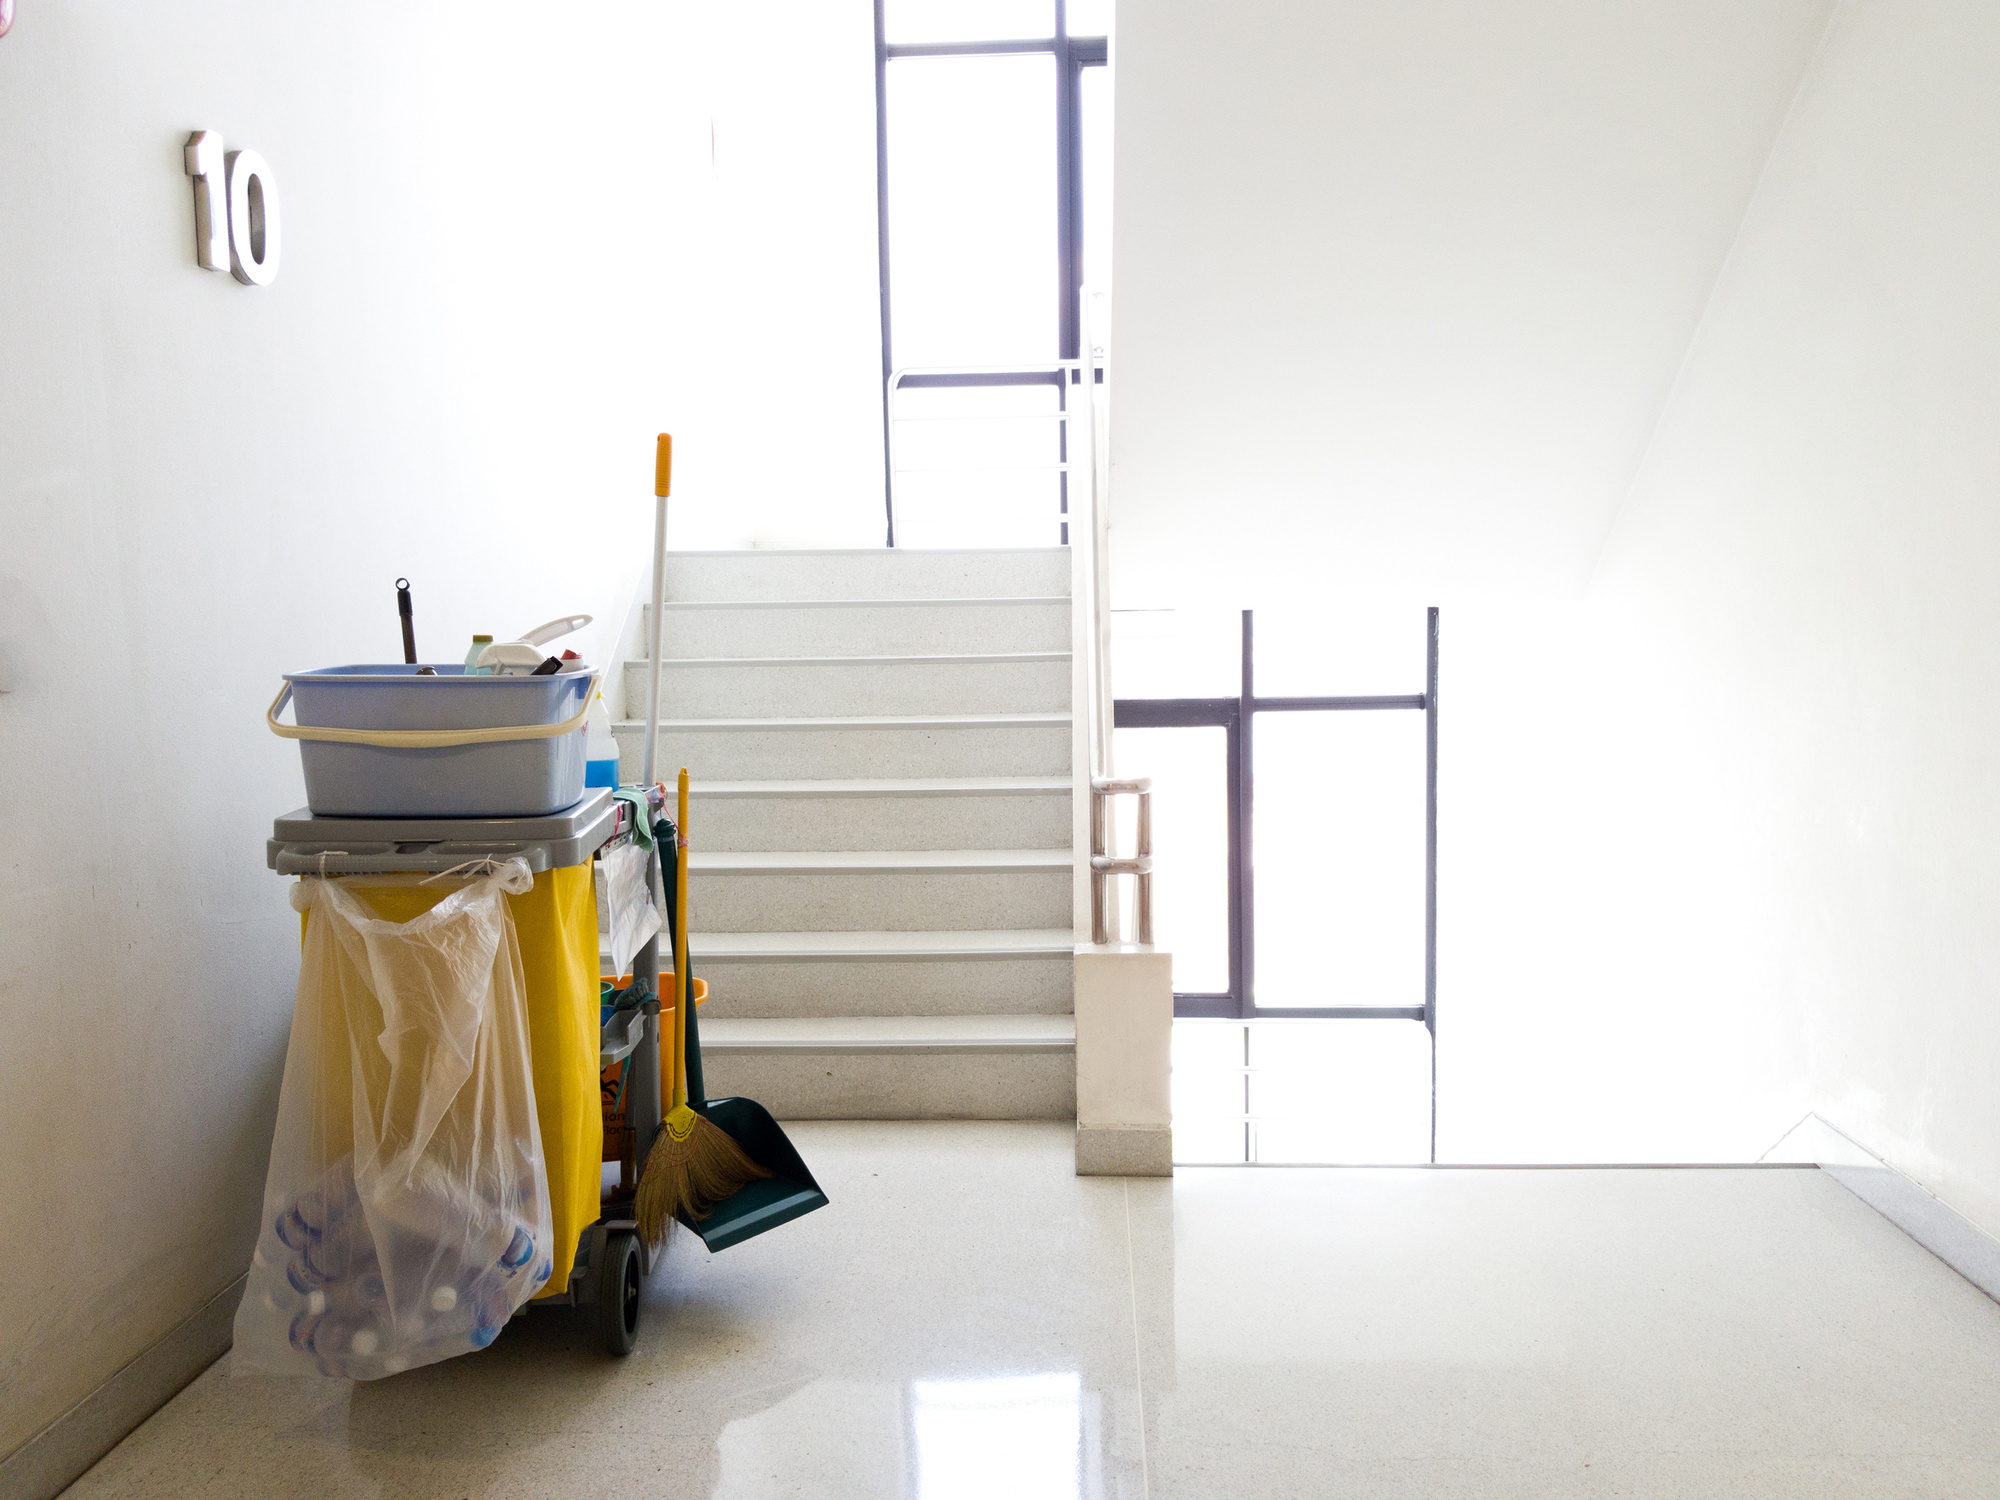 commercial-cleaning-office-cleaning-school-cleaning-janitorial-services-chicago-chicagoland